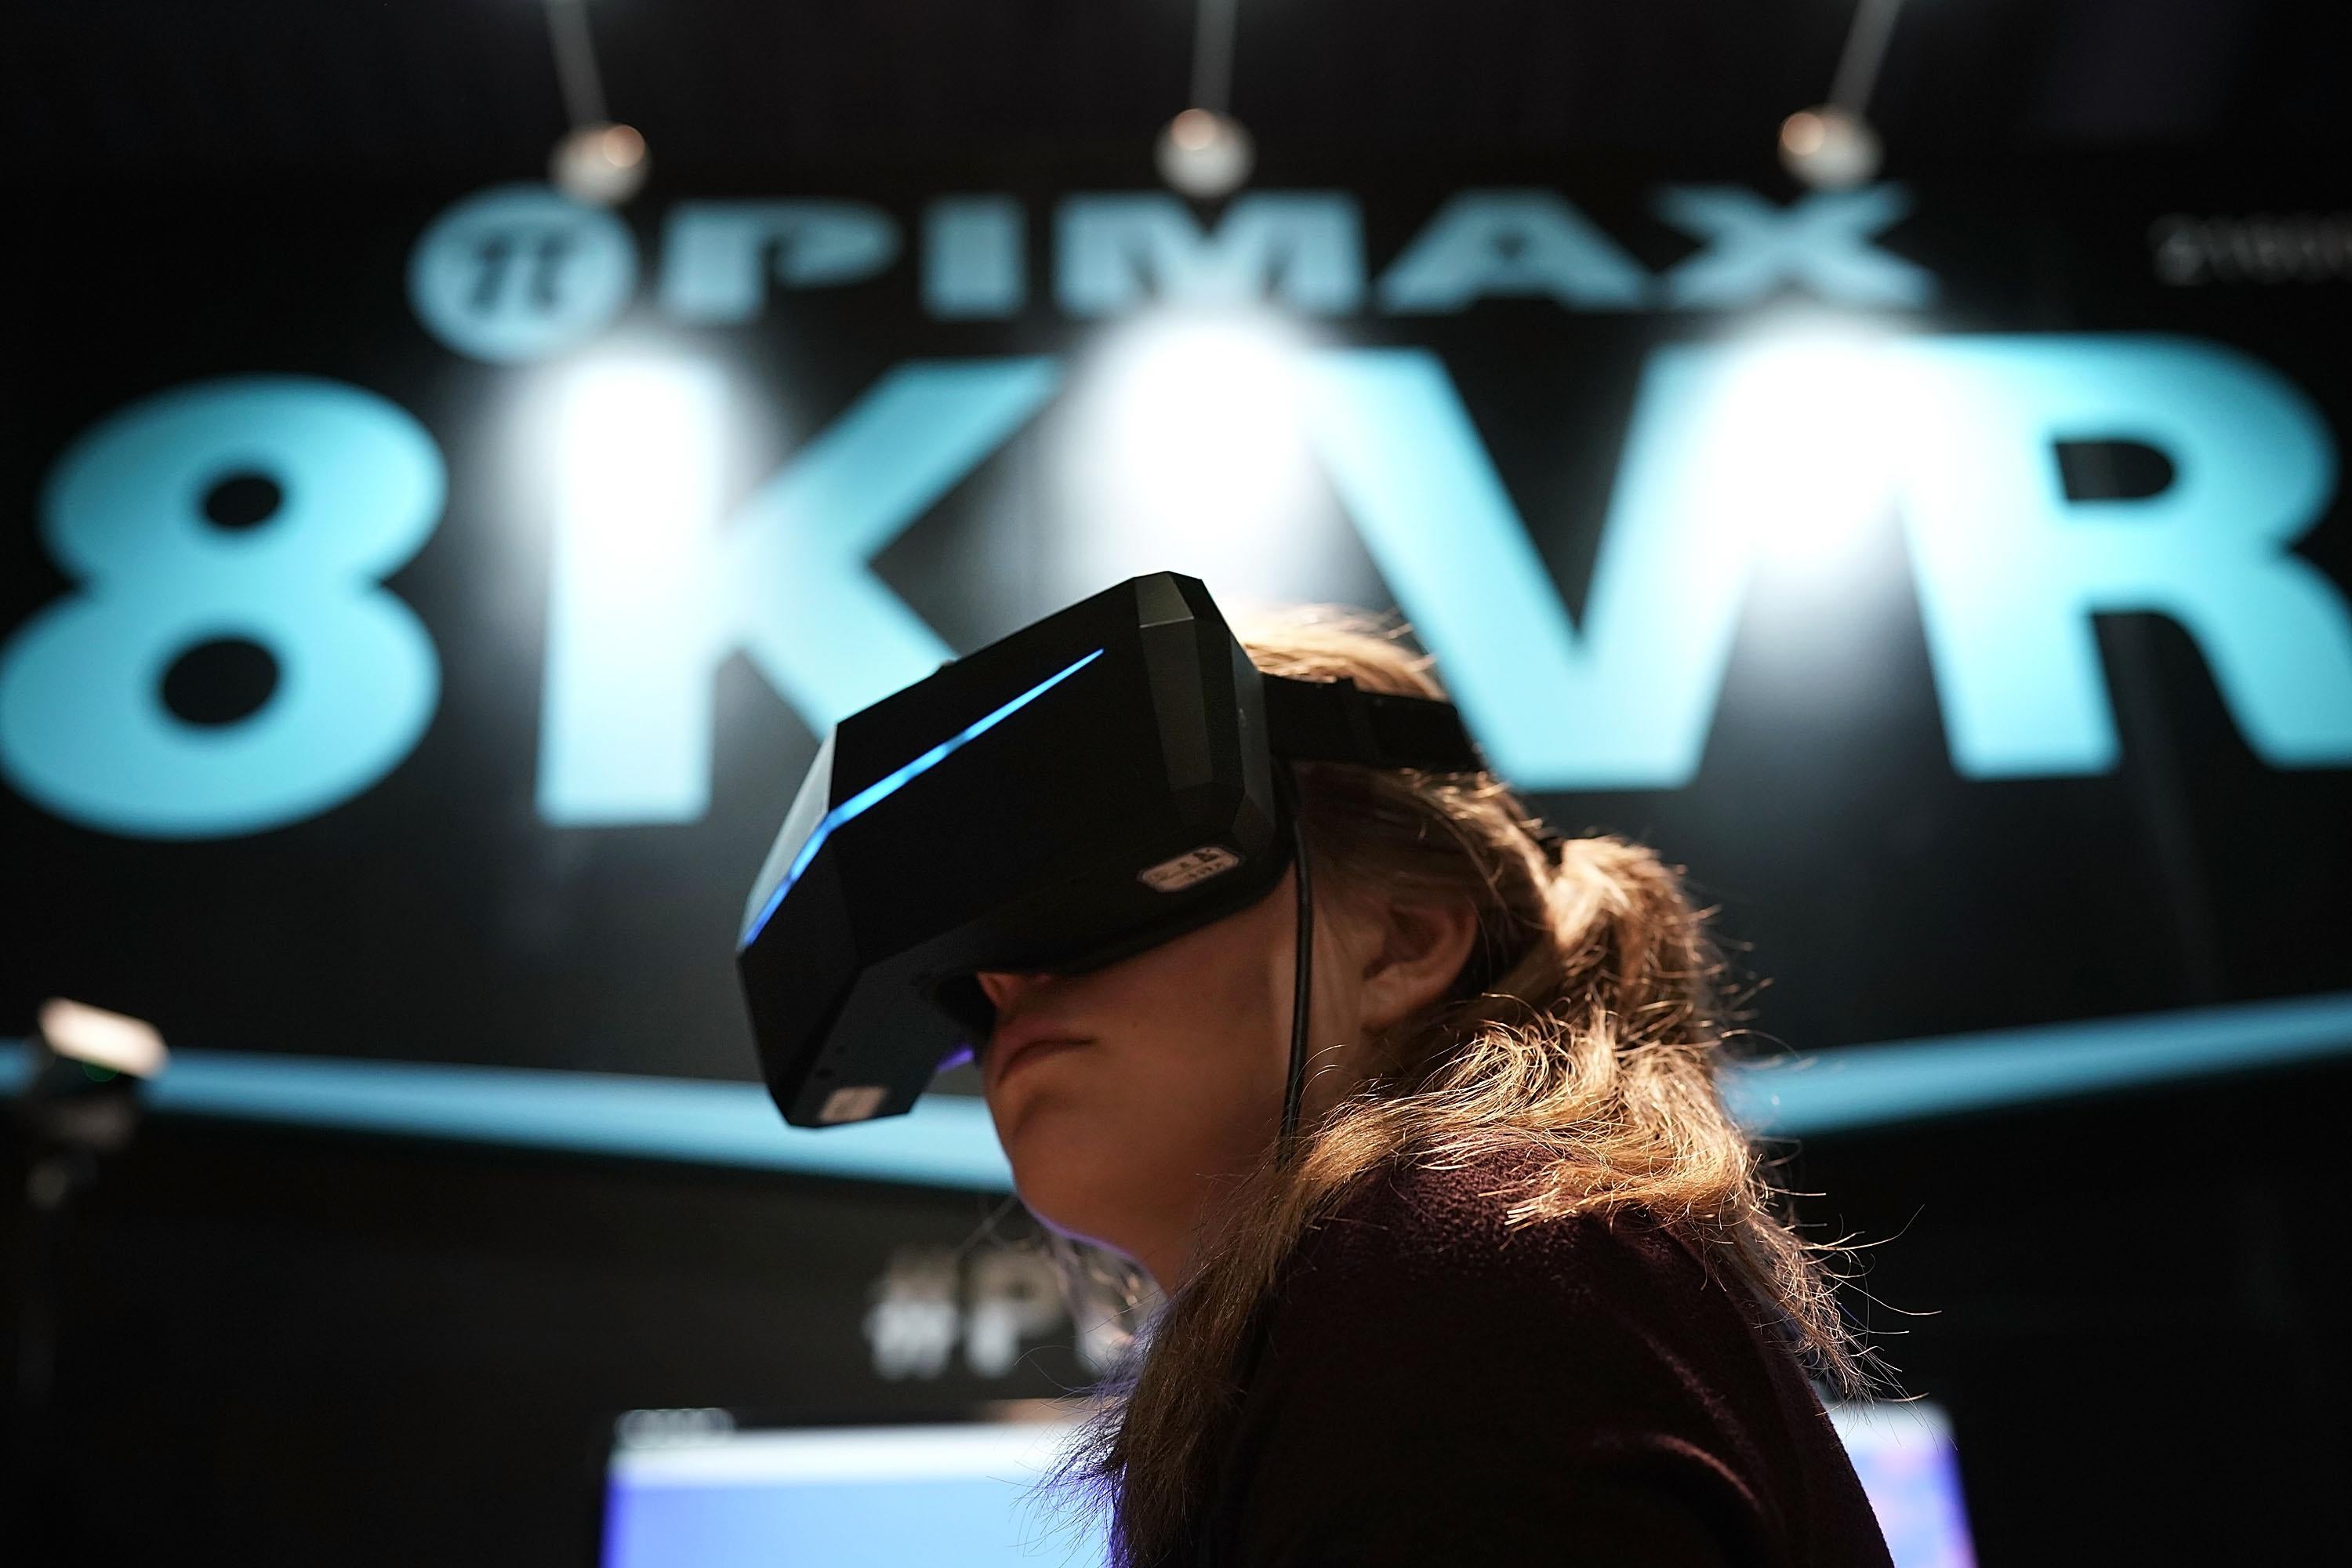 LAS VEGAS, NV - JANUARY 10:  A woman participates in an 8K VR experience during CES 2018 at the Las Vegas Convention Center on January 9, 2018 in Las Vegas, Nevada. CES, the world's largest annual consumer technology trade show, runs through January 12 and features about 3,900 exhibitors showing off their latest products and services to more than 170,000 attendees.  (Photo by Alex Wong/Getty Images)